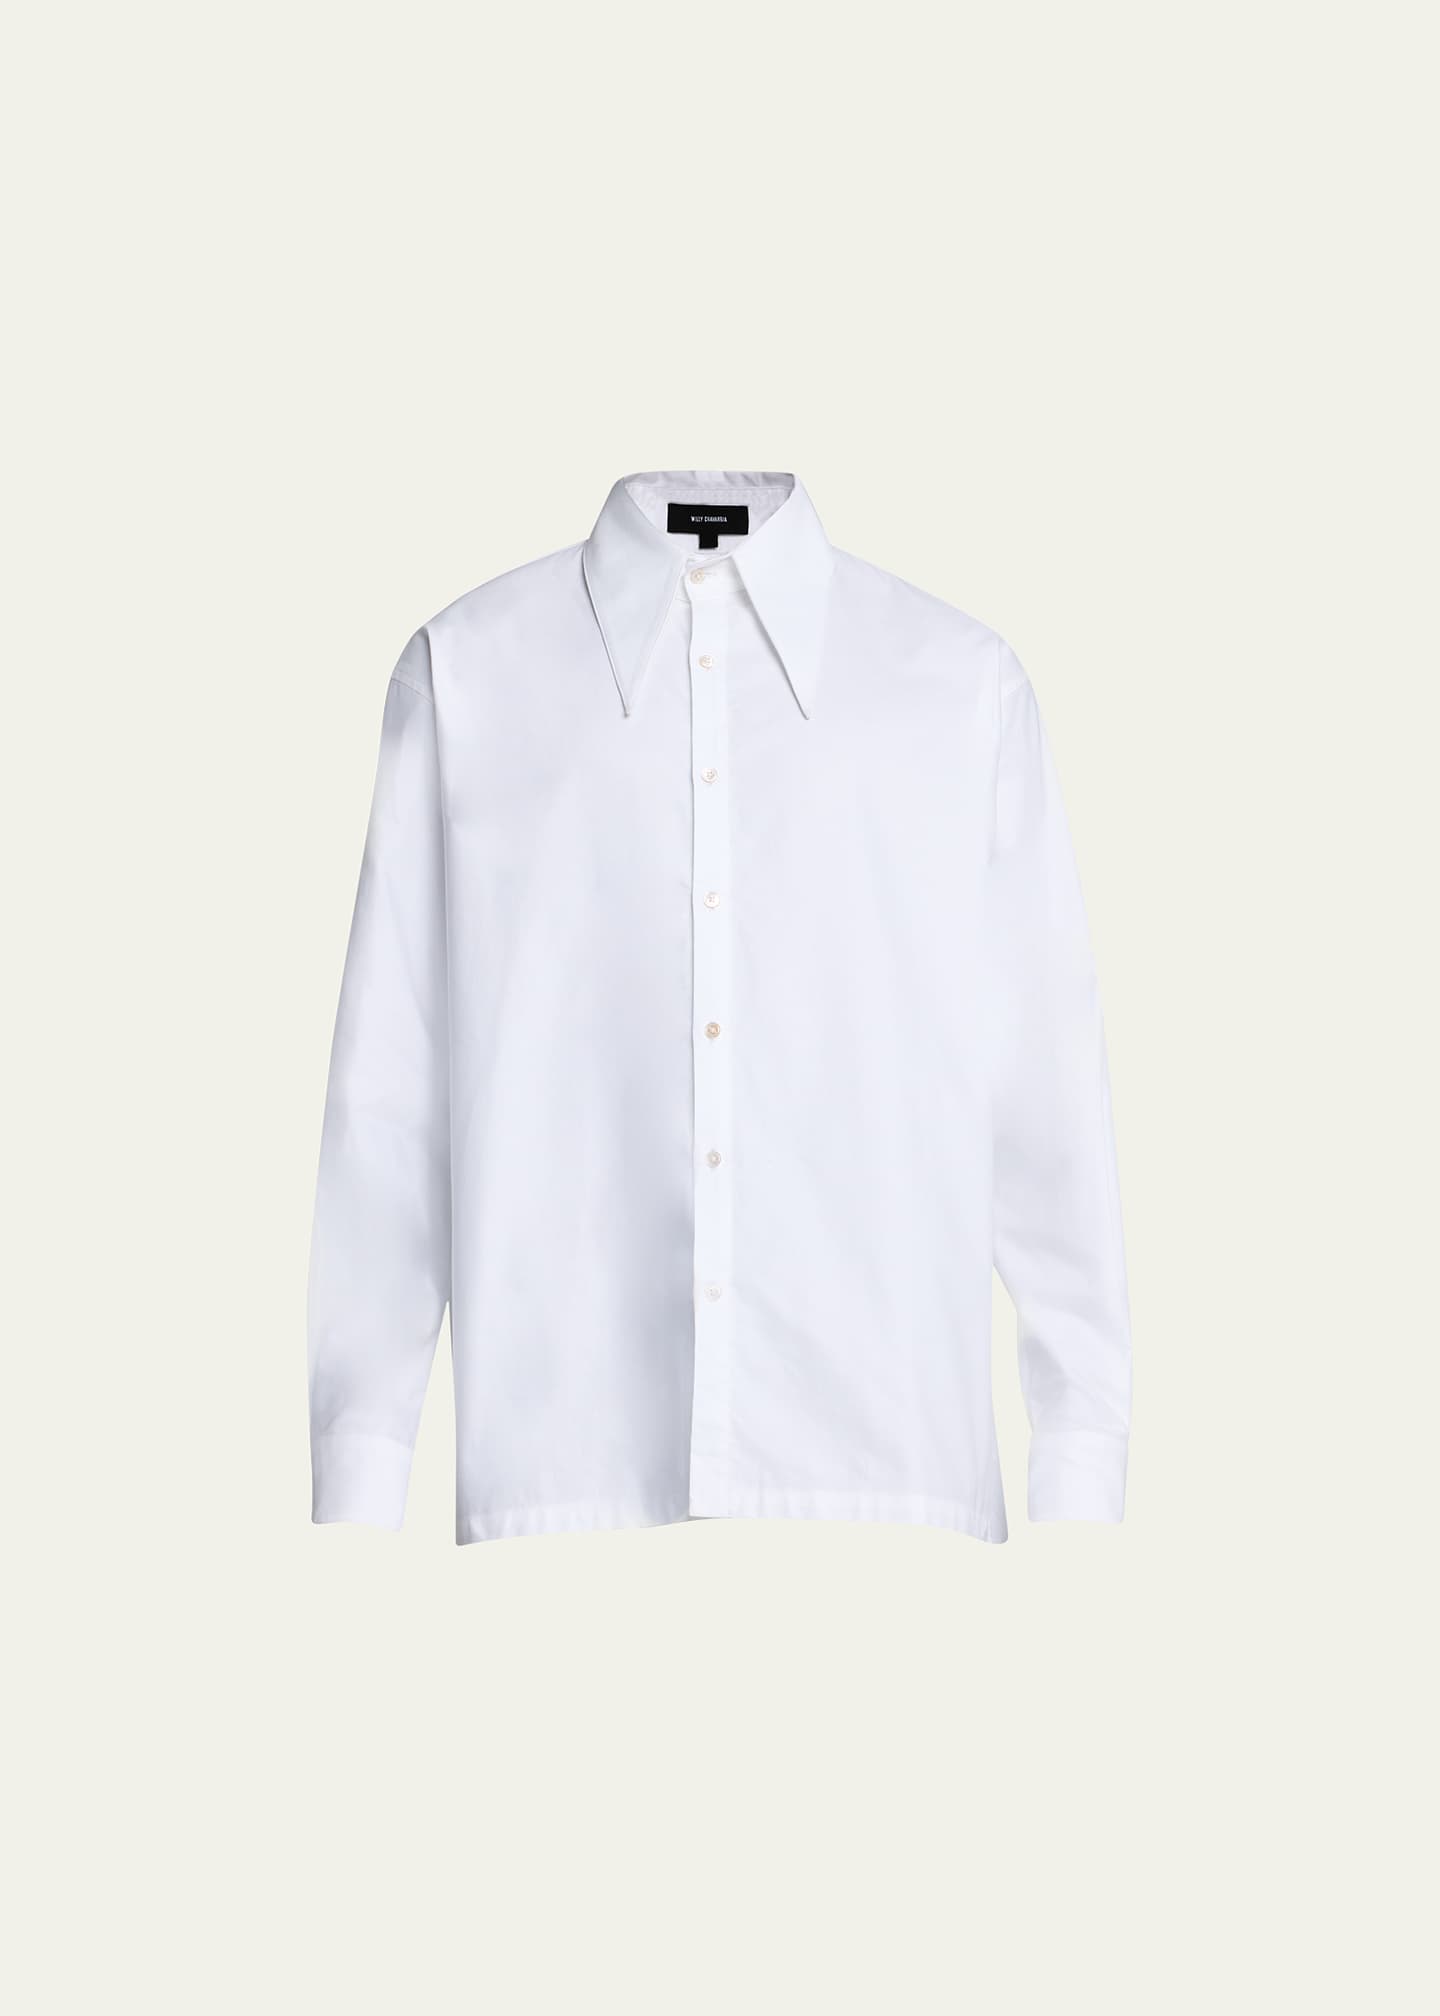 Willy Chavarria Men's Point-Collar Solid Dress Shirt - Bergdorf